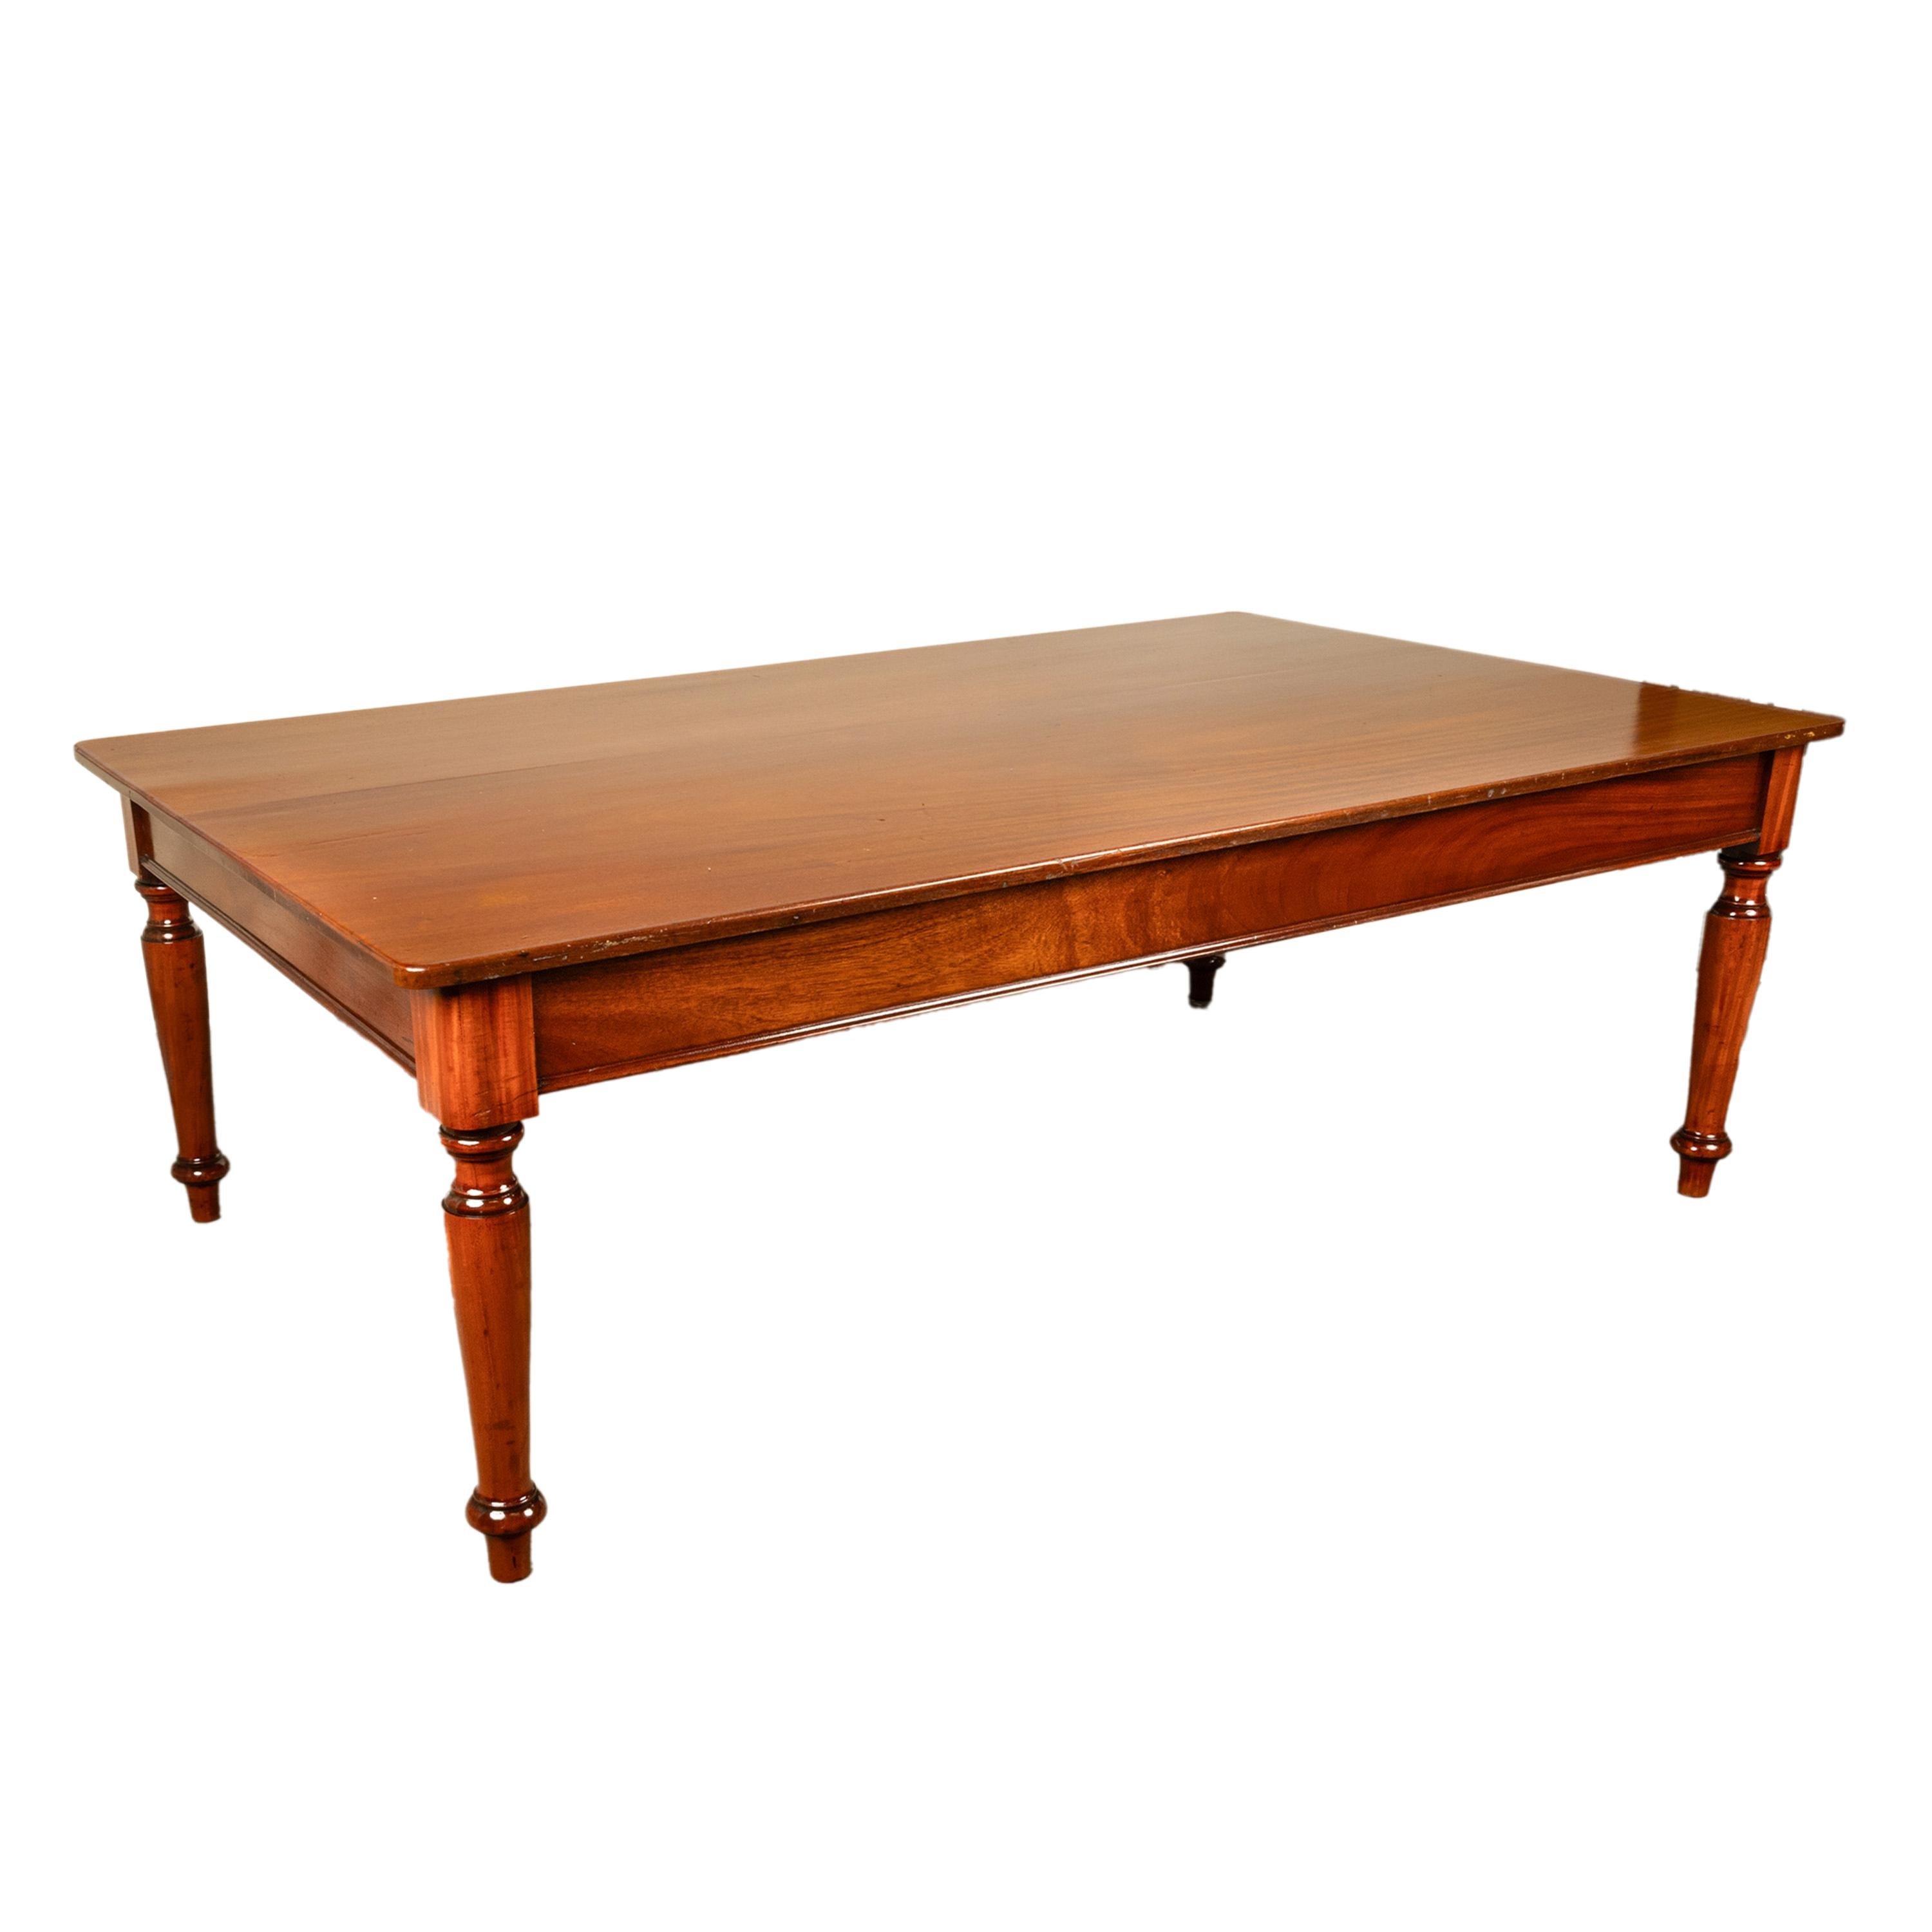 Antique Monumental 19th Century Mahogany Library Conference Dining Table 1860 For Sale 9